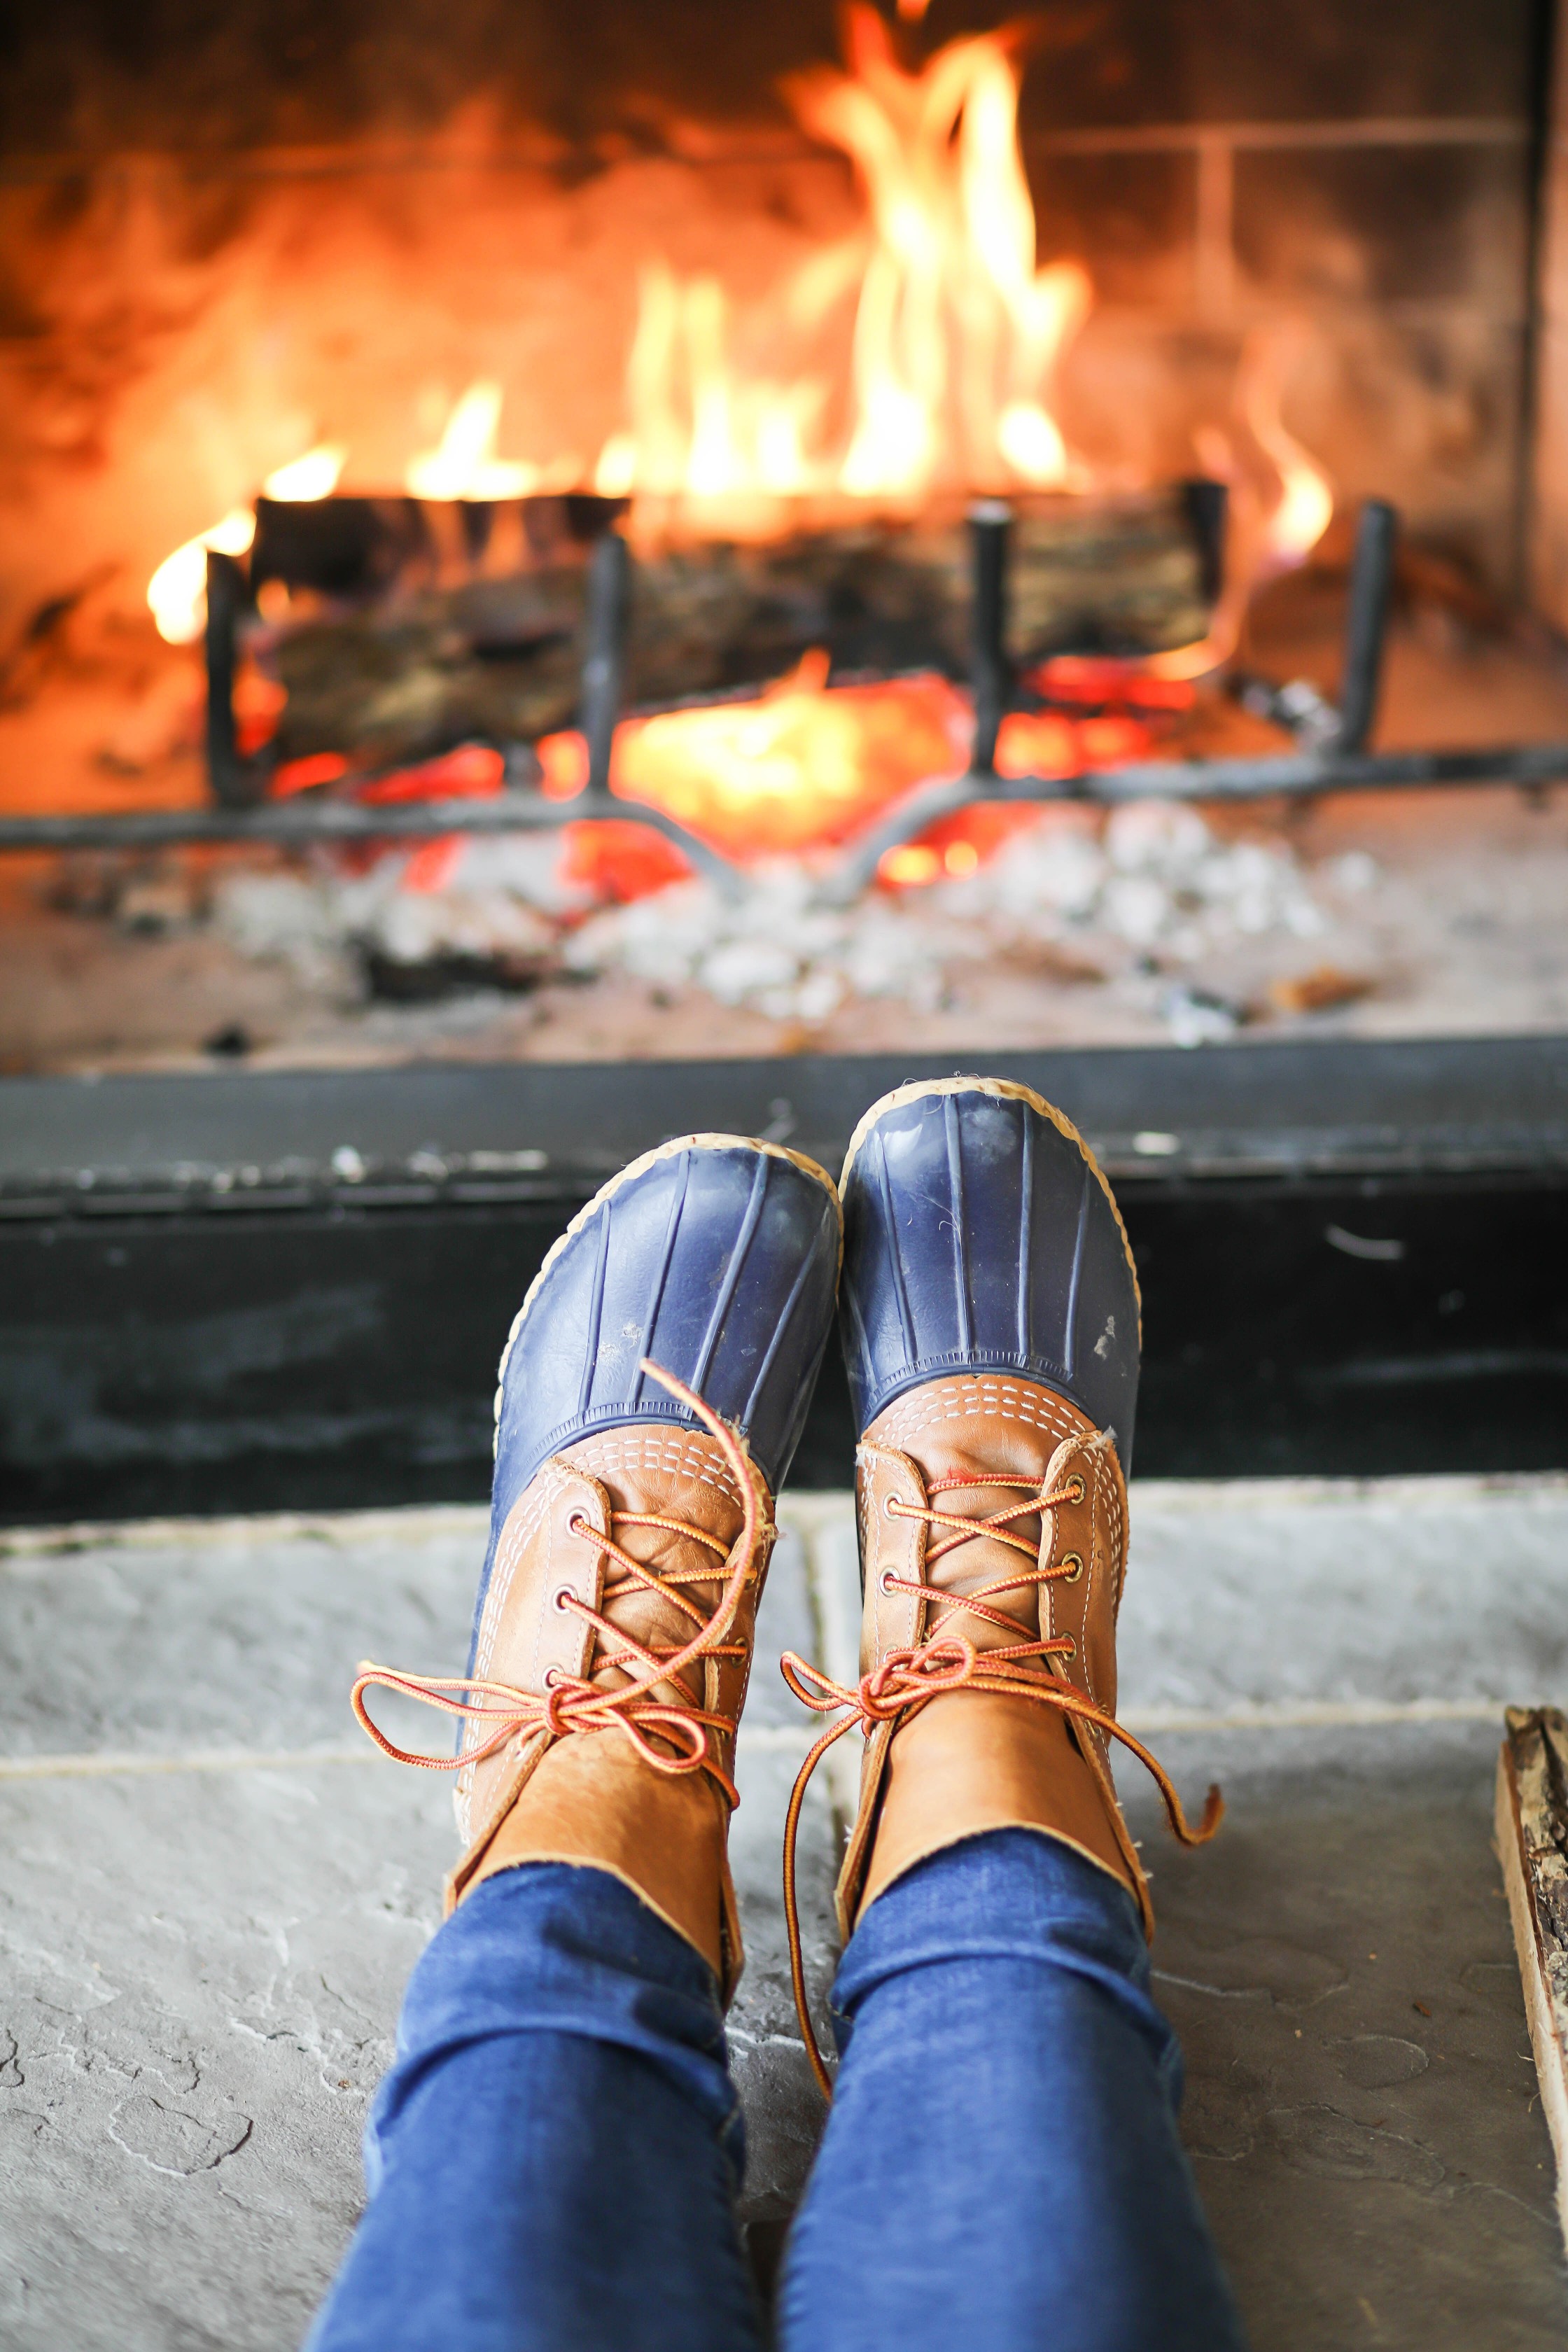 Cozy cable knit sweater in front of stone fireplace! This winter cable knit sweater is so cute and the fire looks so inviting! I paired it with my L.L. Bean duck Boots! Details on fashion blog daily dose of charm by lauren lindmark